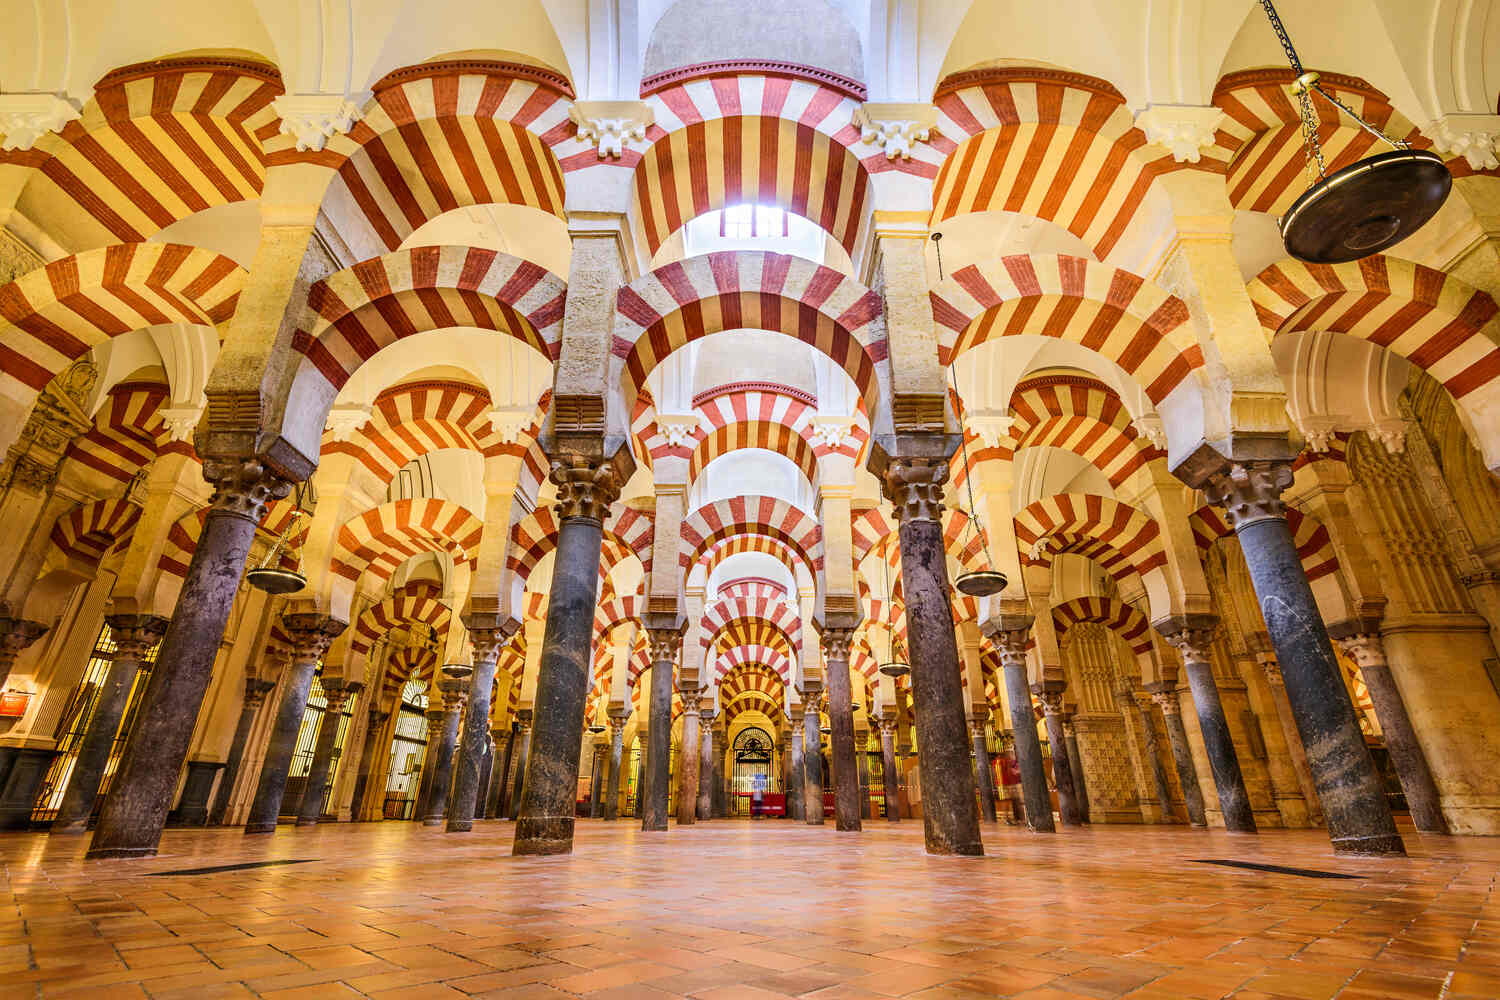 Inside the arched Mosque in Cordoba the mesquita